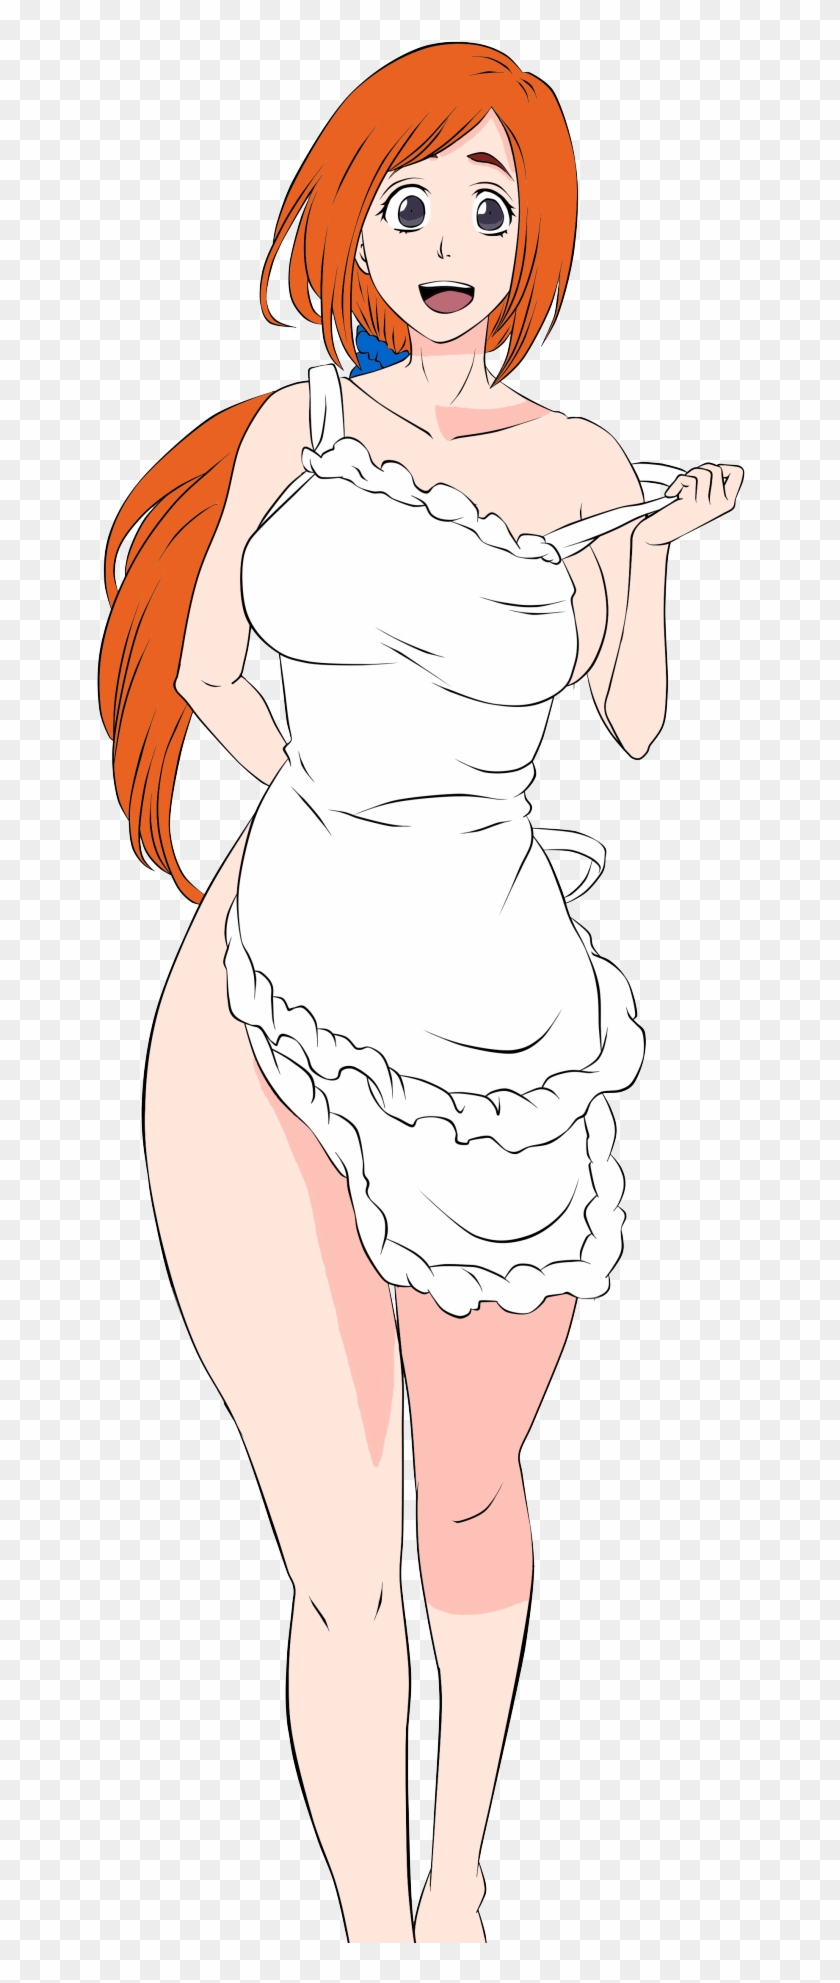 “orihime With Only A Apron On - Illustration Clipart #4058199